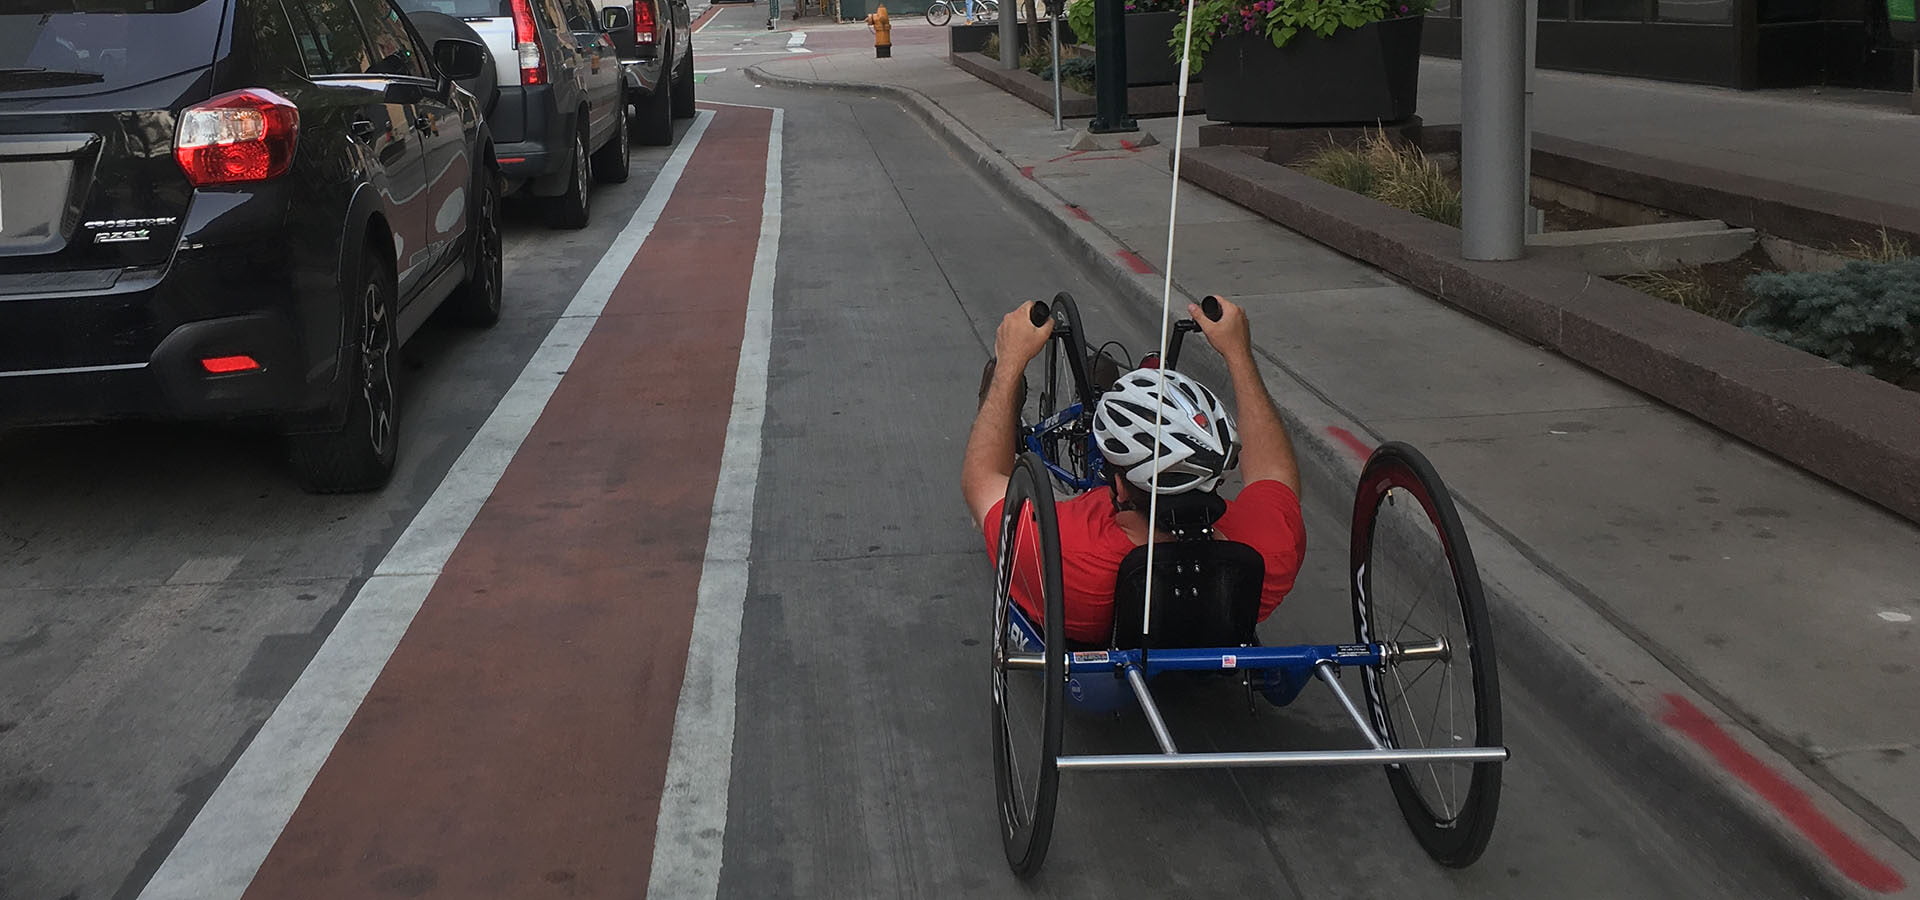 Recumbent cycylist approaches an intersection in the bike lane along side traffic